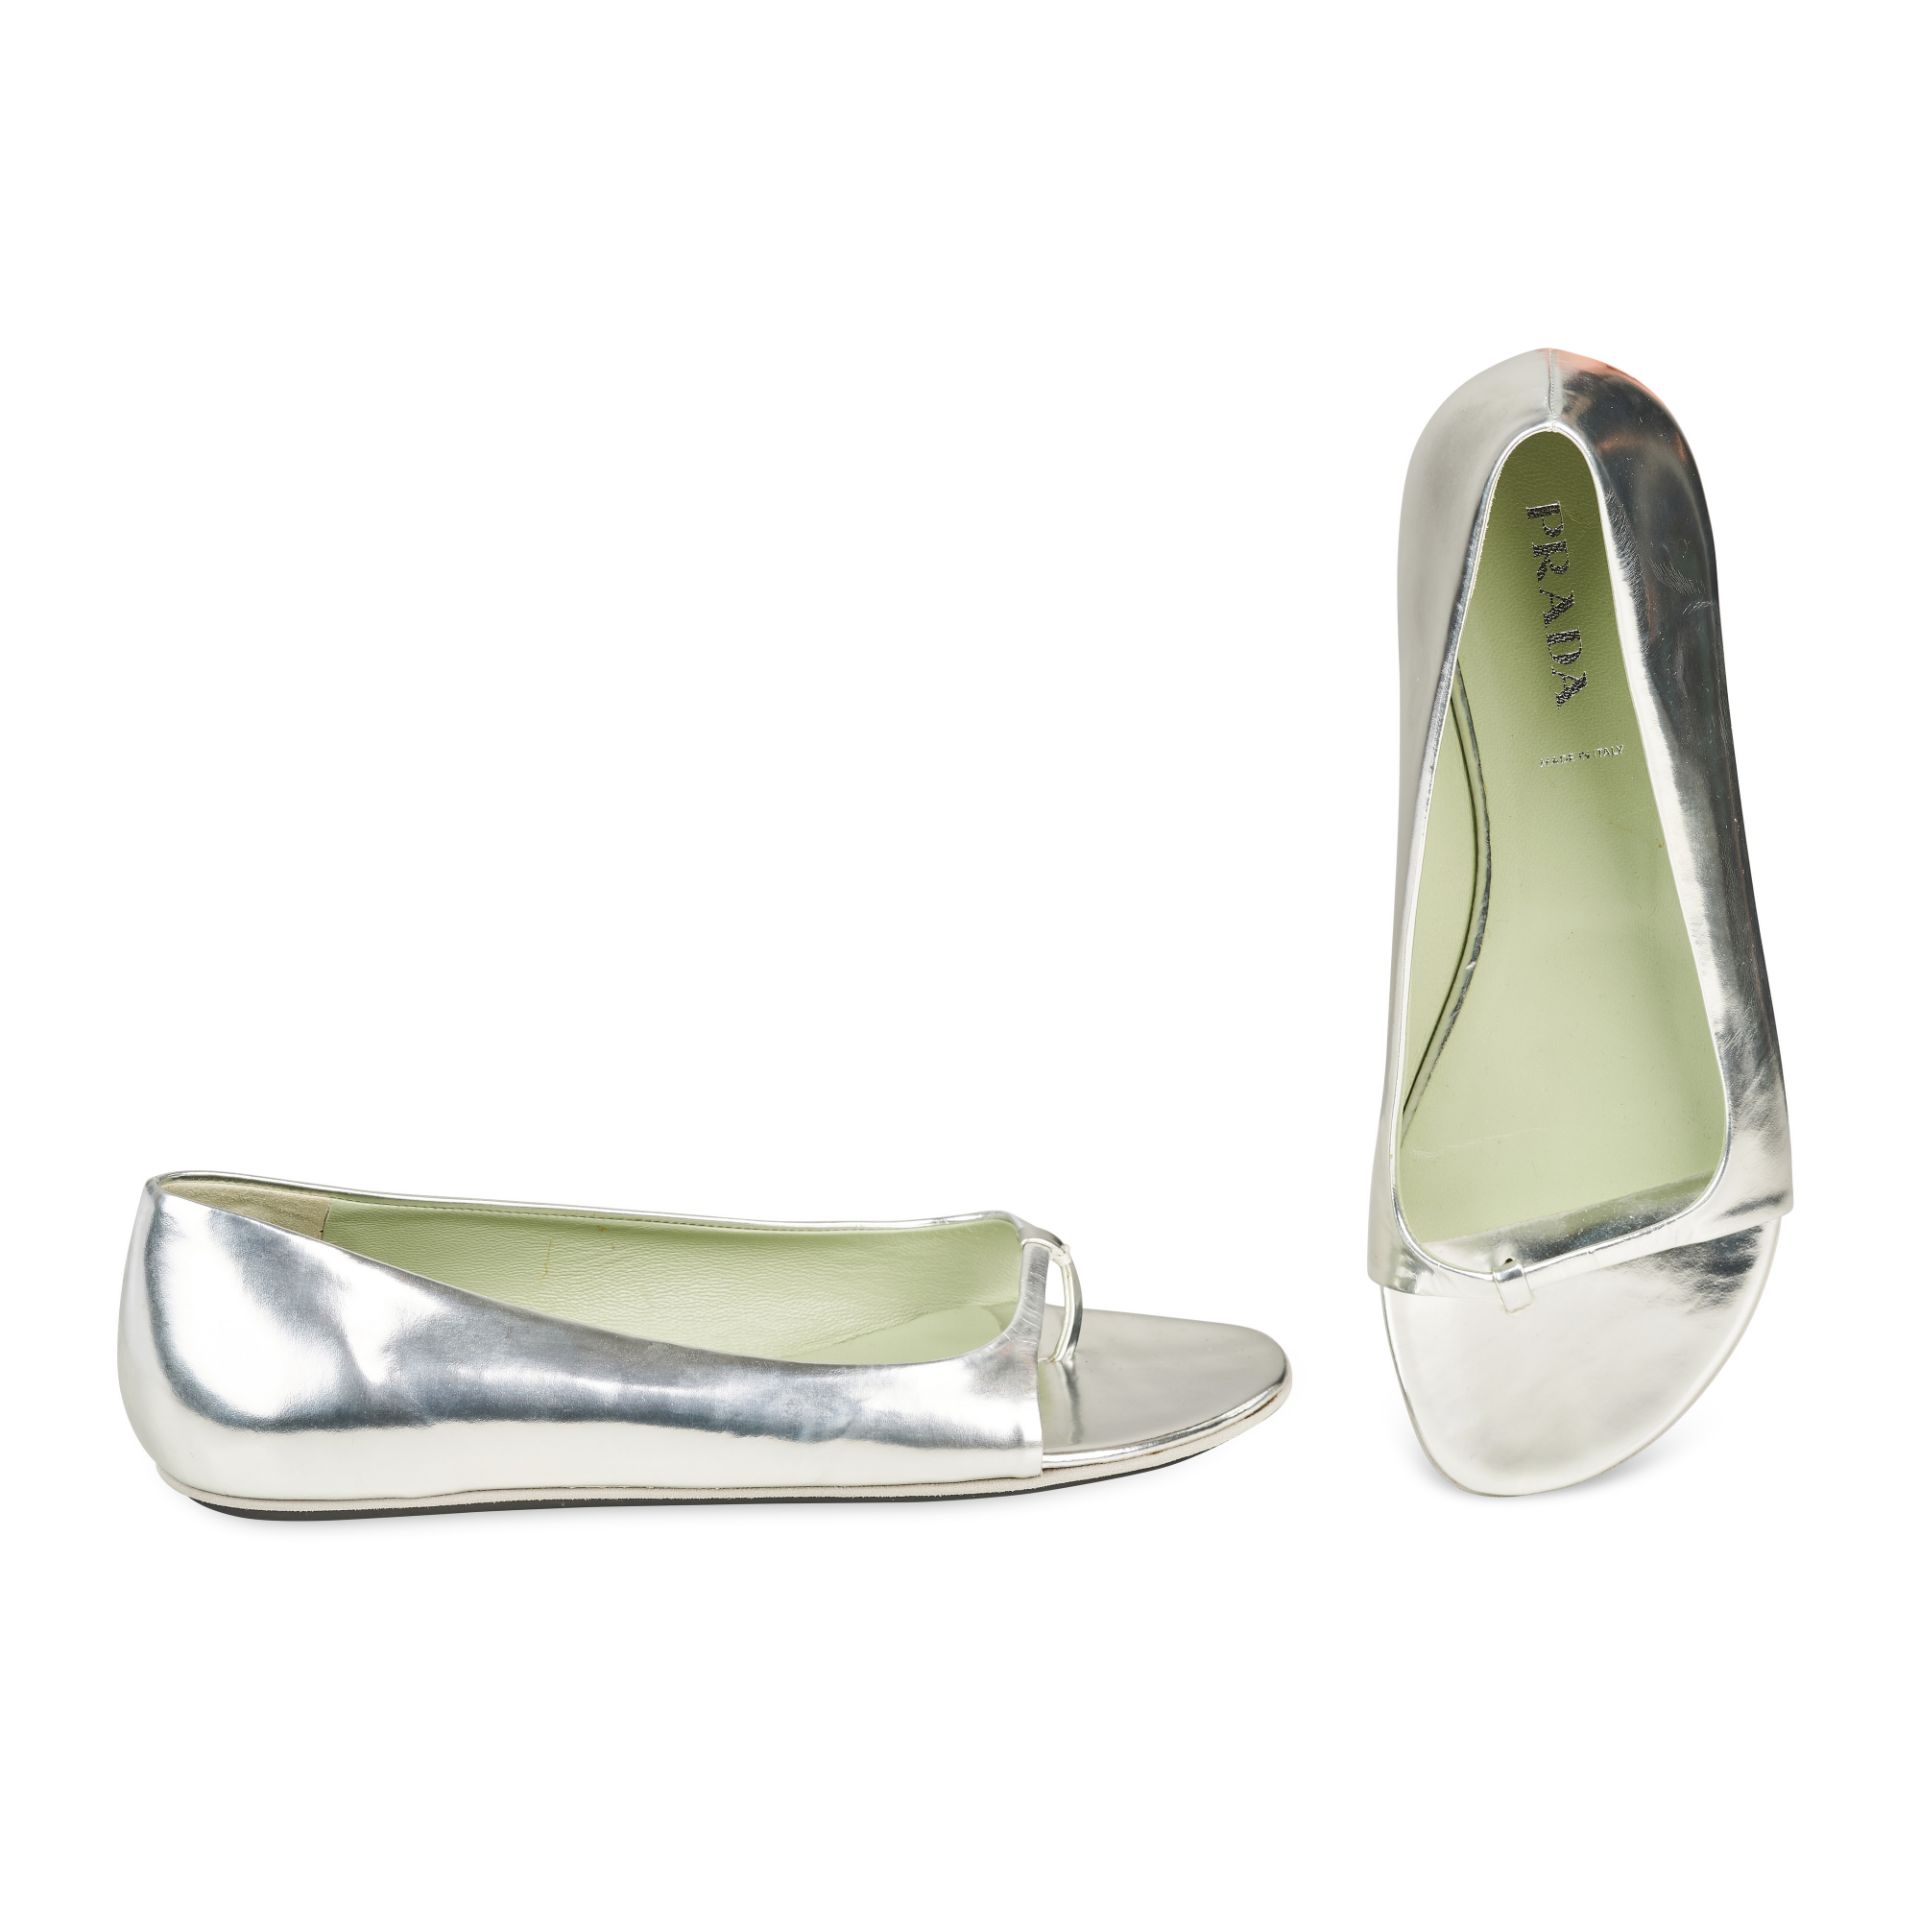 NO RESERVE PRADA SILVER OPEN-TOE FLAT SHOES - Image 2 of 2